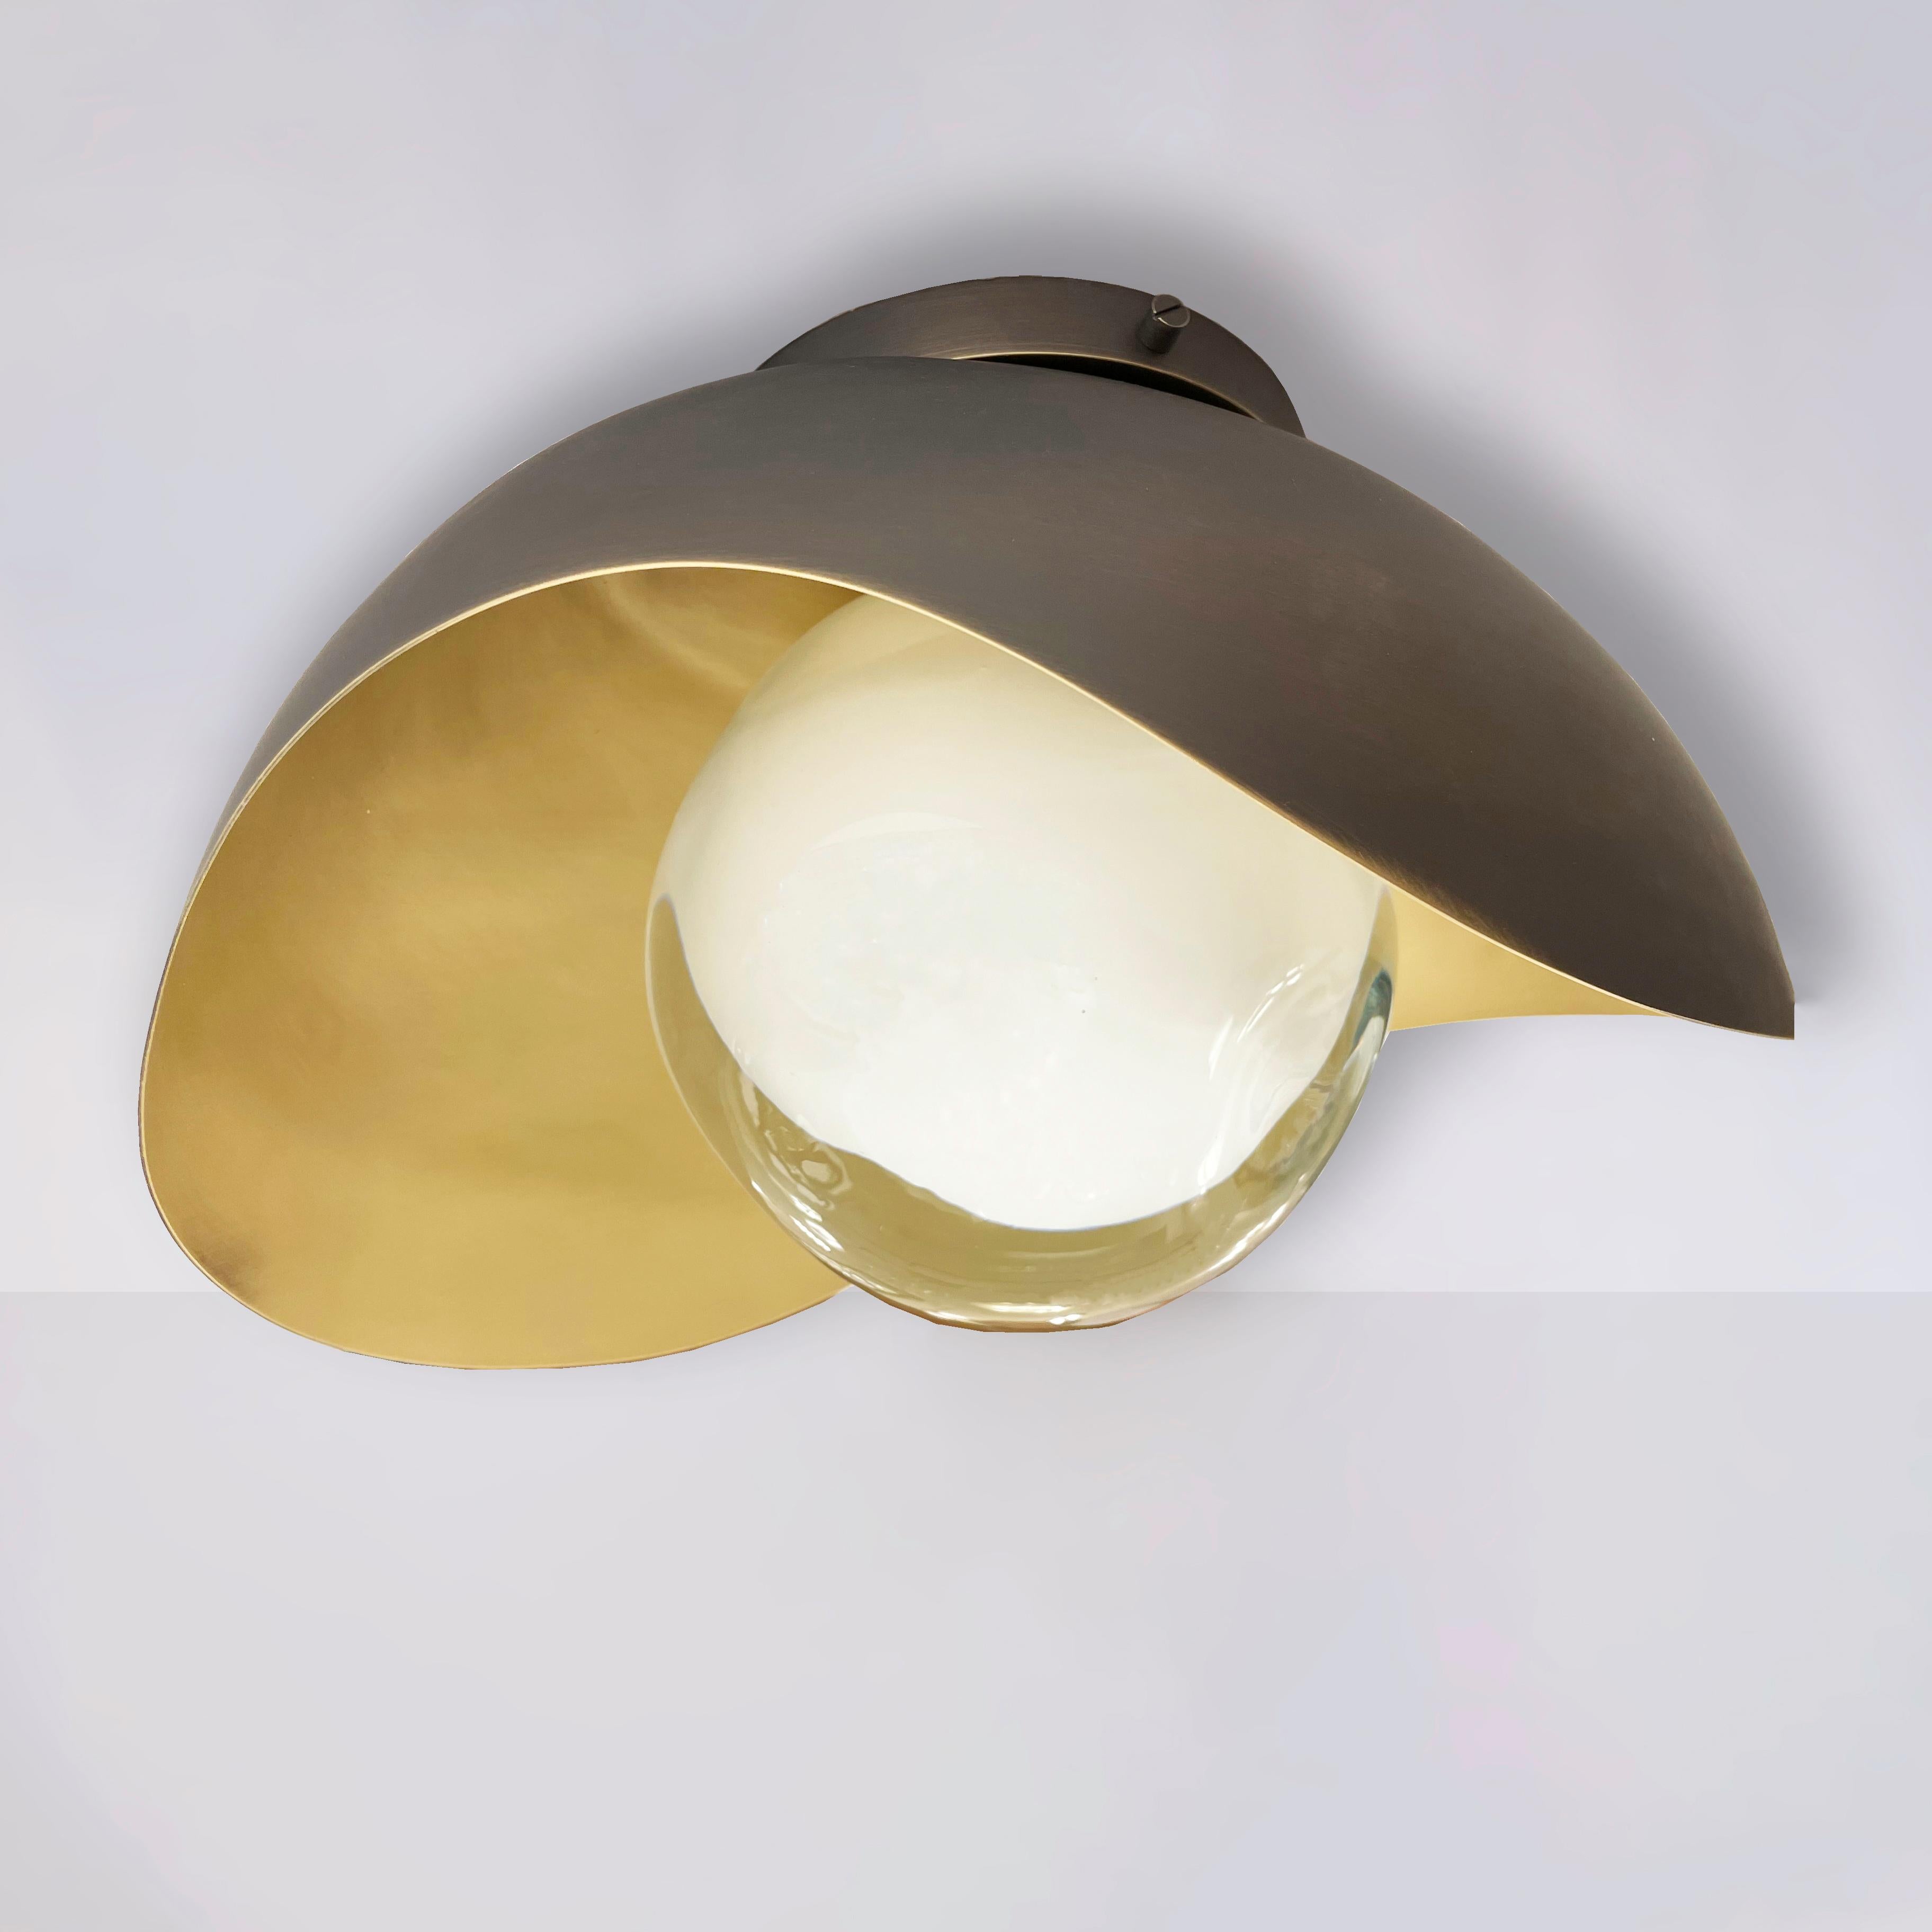 Perla Flushmount Ceiling Light by Gaspare Asaro-Polished Copper/Sand White For Sale 4